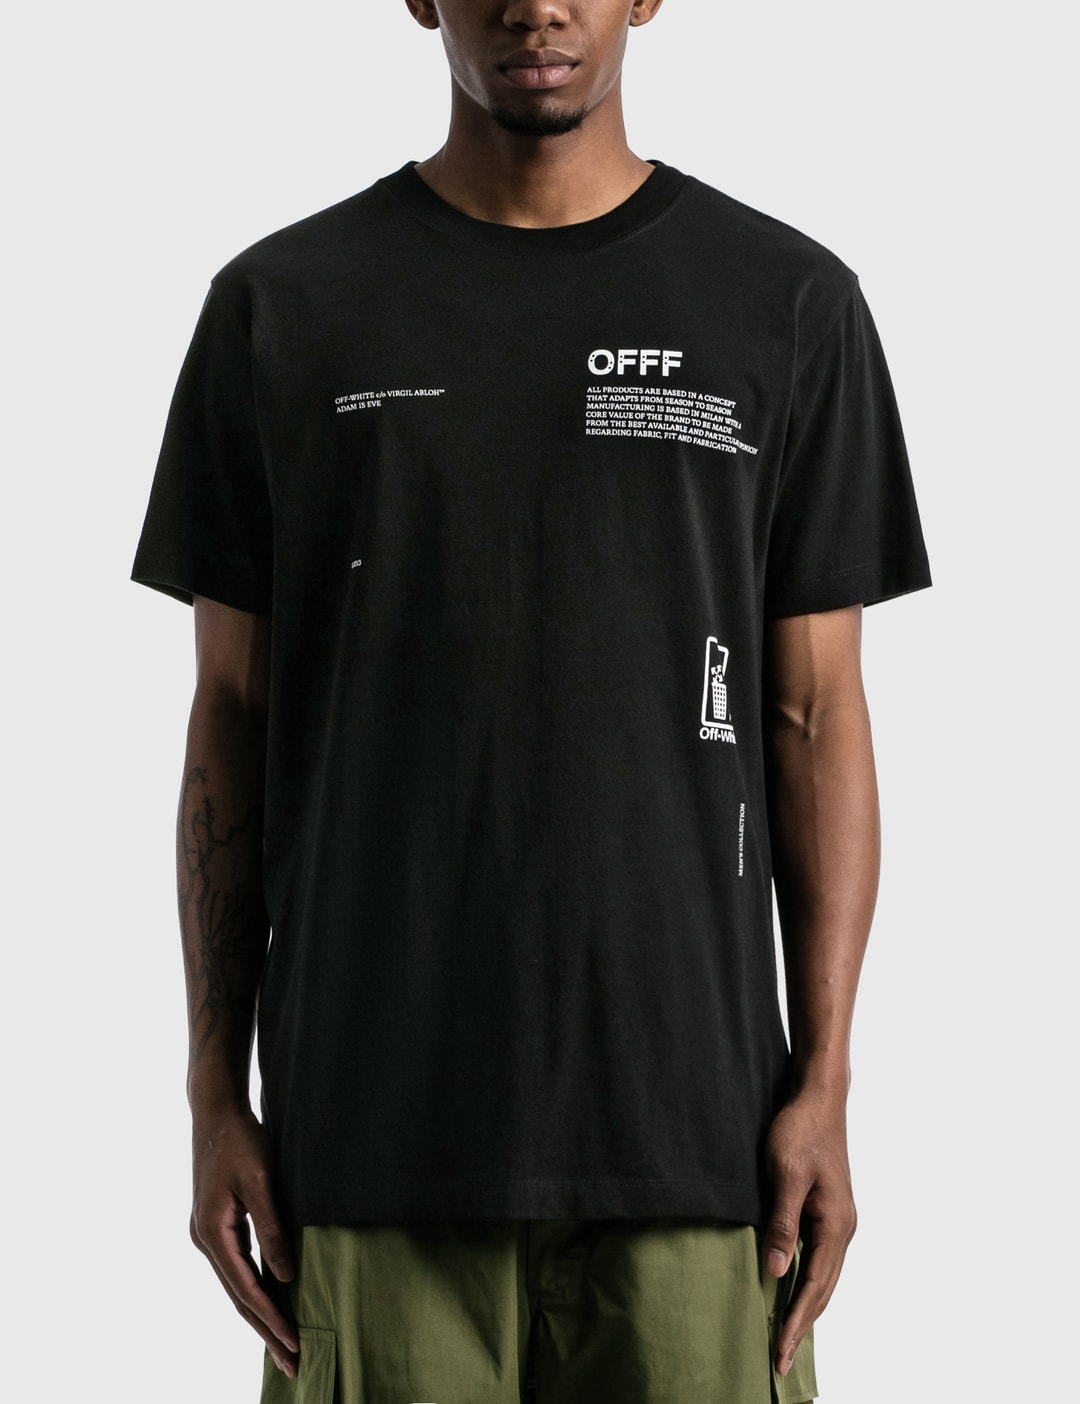 by Lifestyle Curated Off-White™ T-shirt - Hypebeast - and HBX Care Arrow Globally Fashion Take | Slim